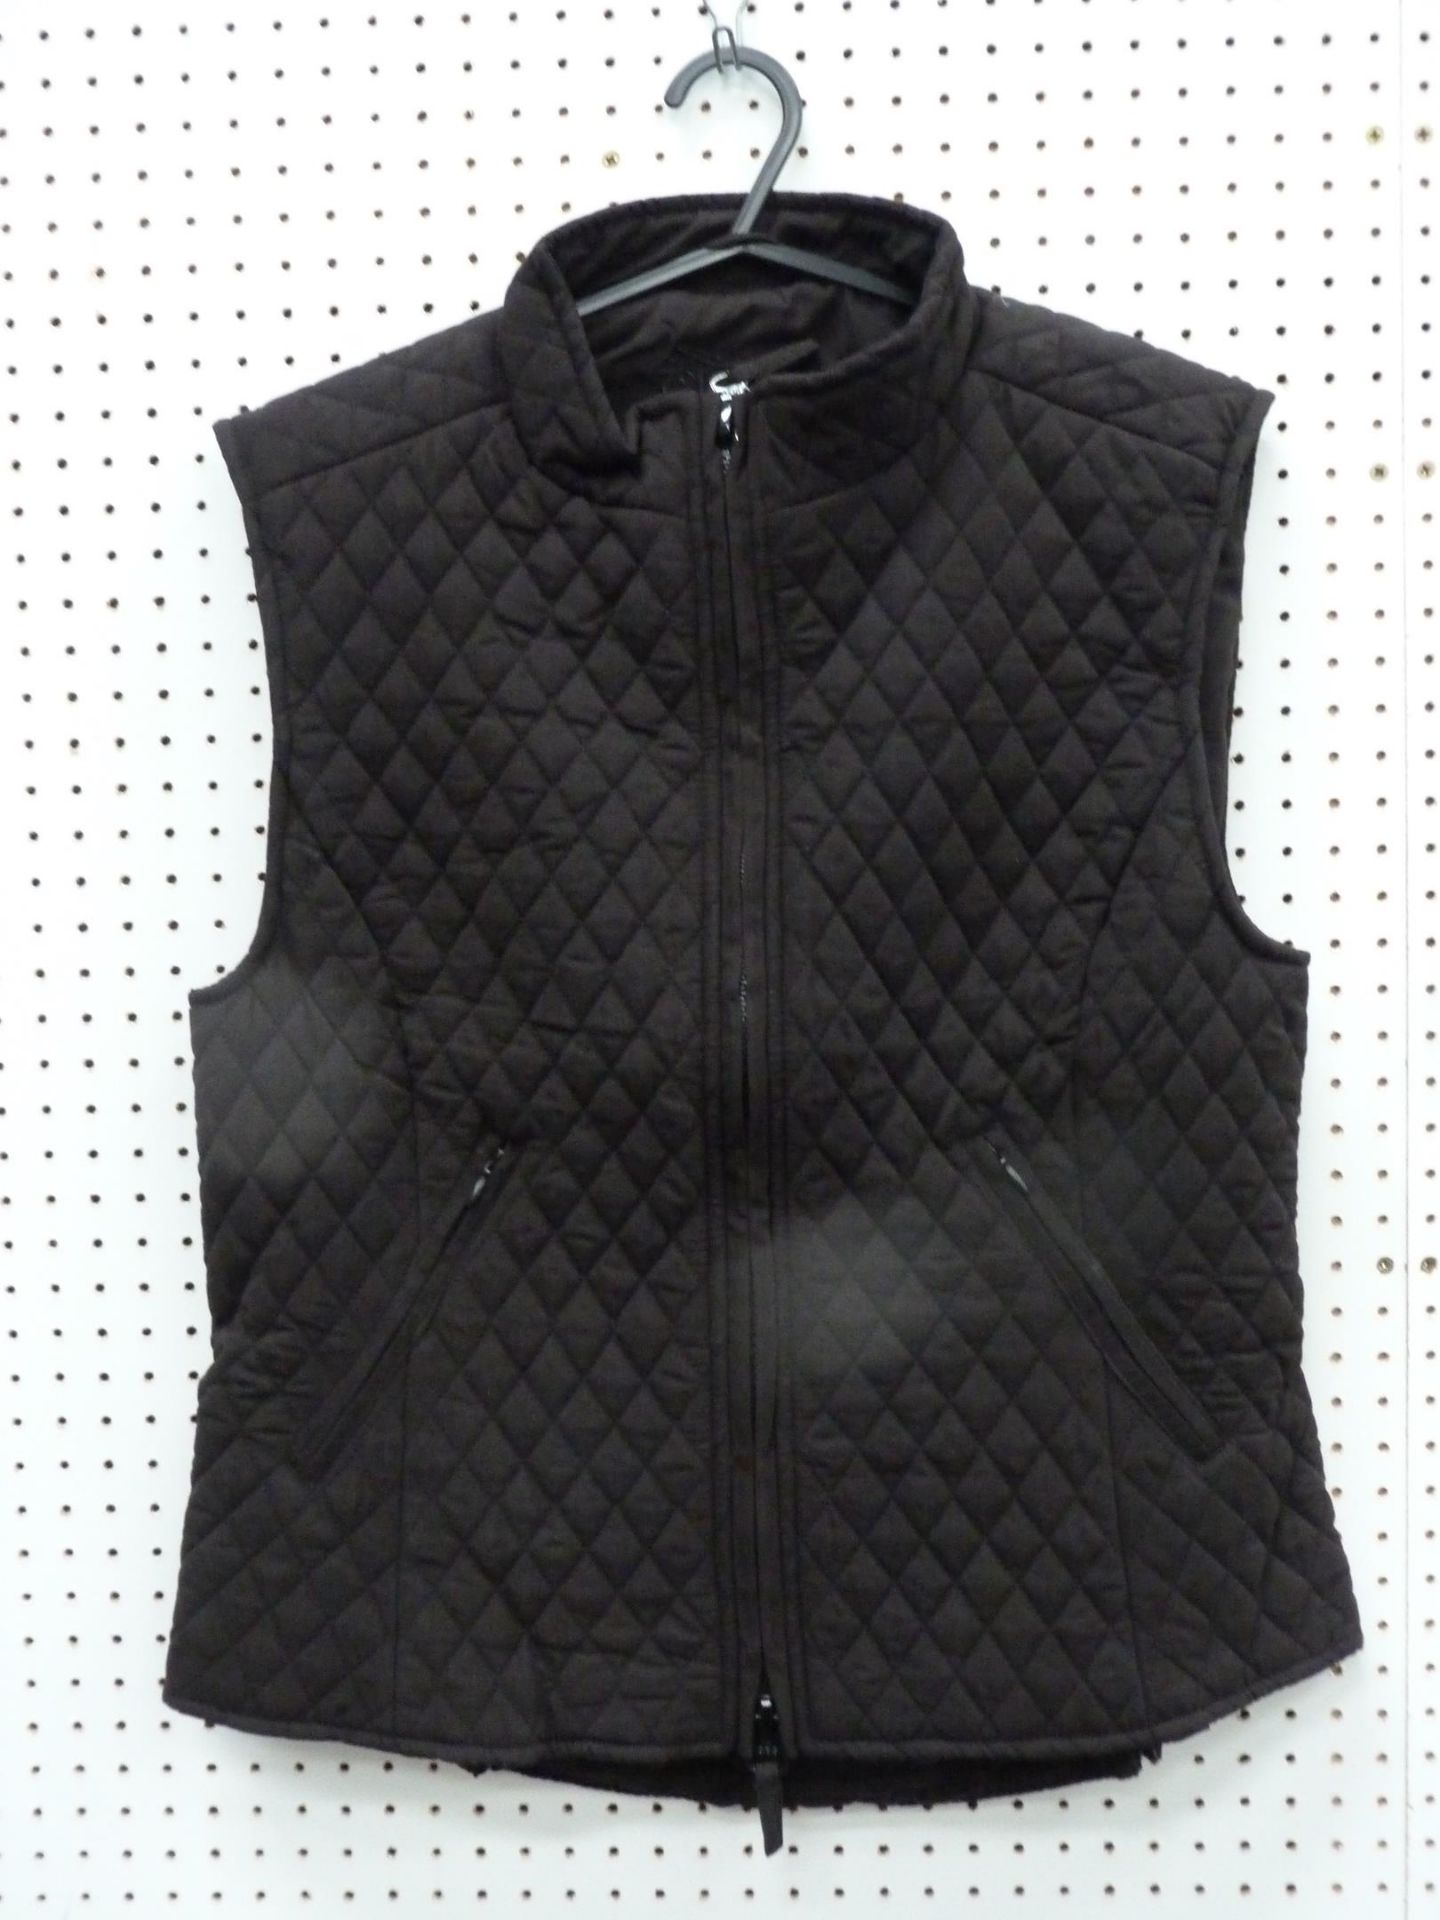 * Two Ladies 'Bridleway' Padded Gilets in Black; one X Small, one Medium together with a Shires - Bild 3 aus 6